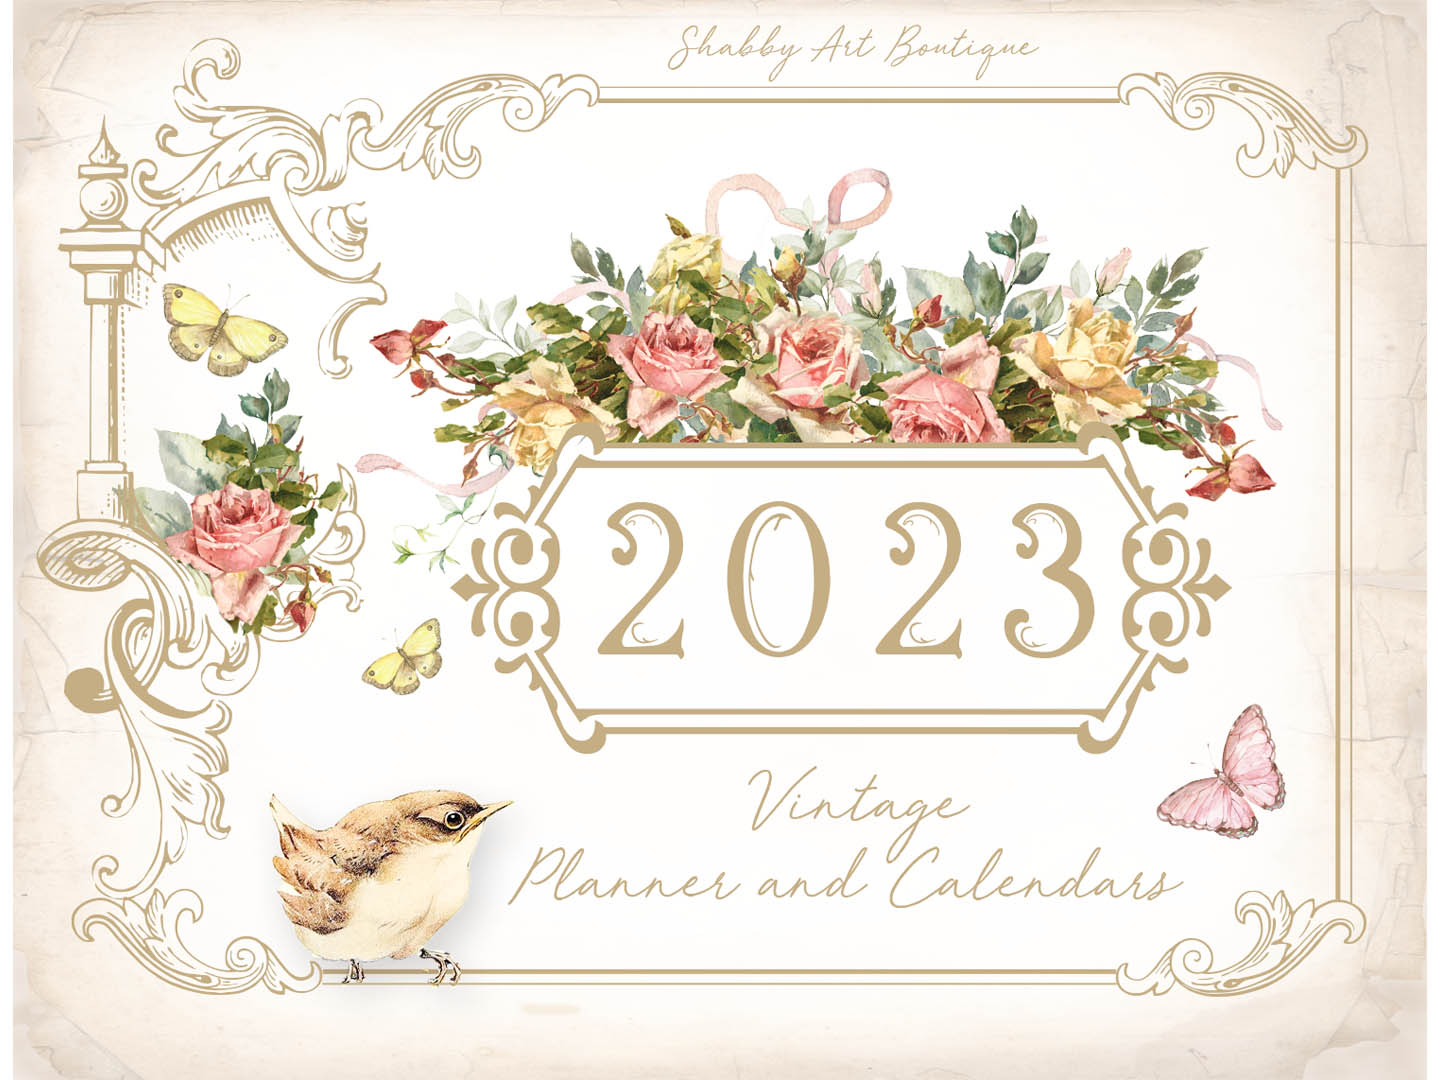 Shabby Art Boutique digital kit - 2023 Vintage Planners and Calendars - kit available on Etsy